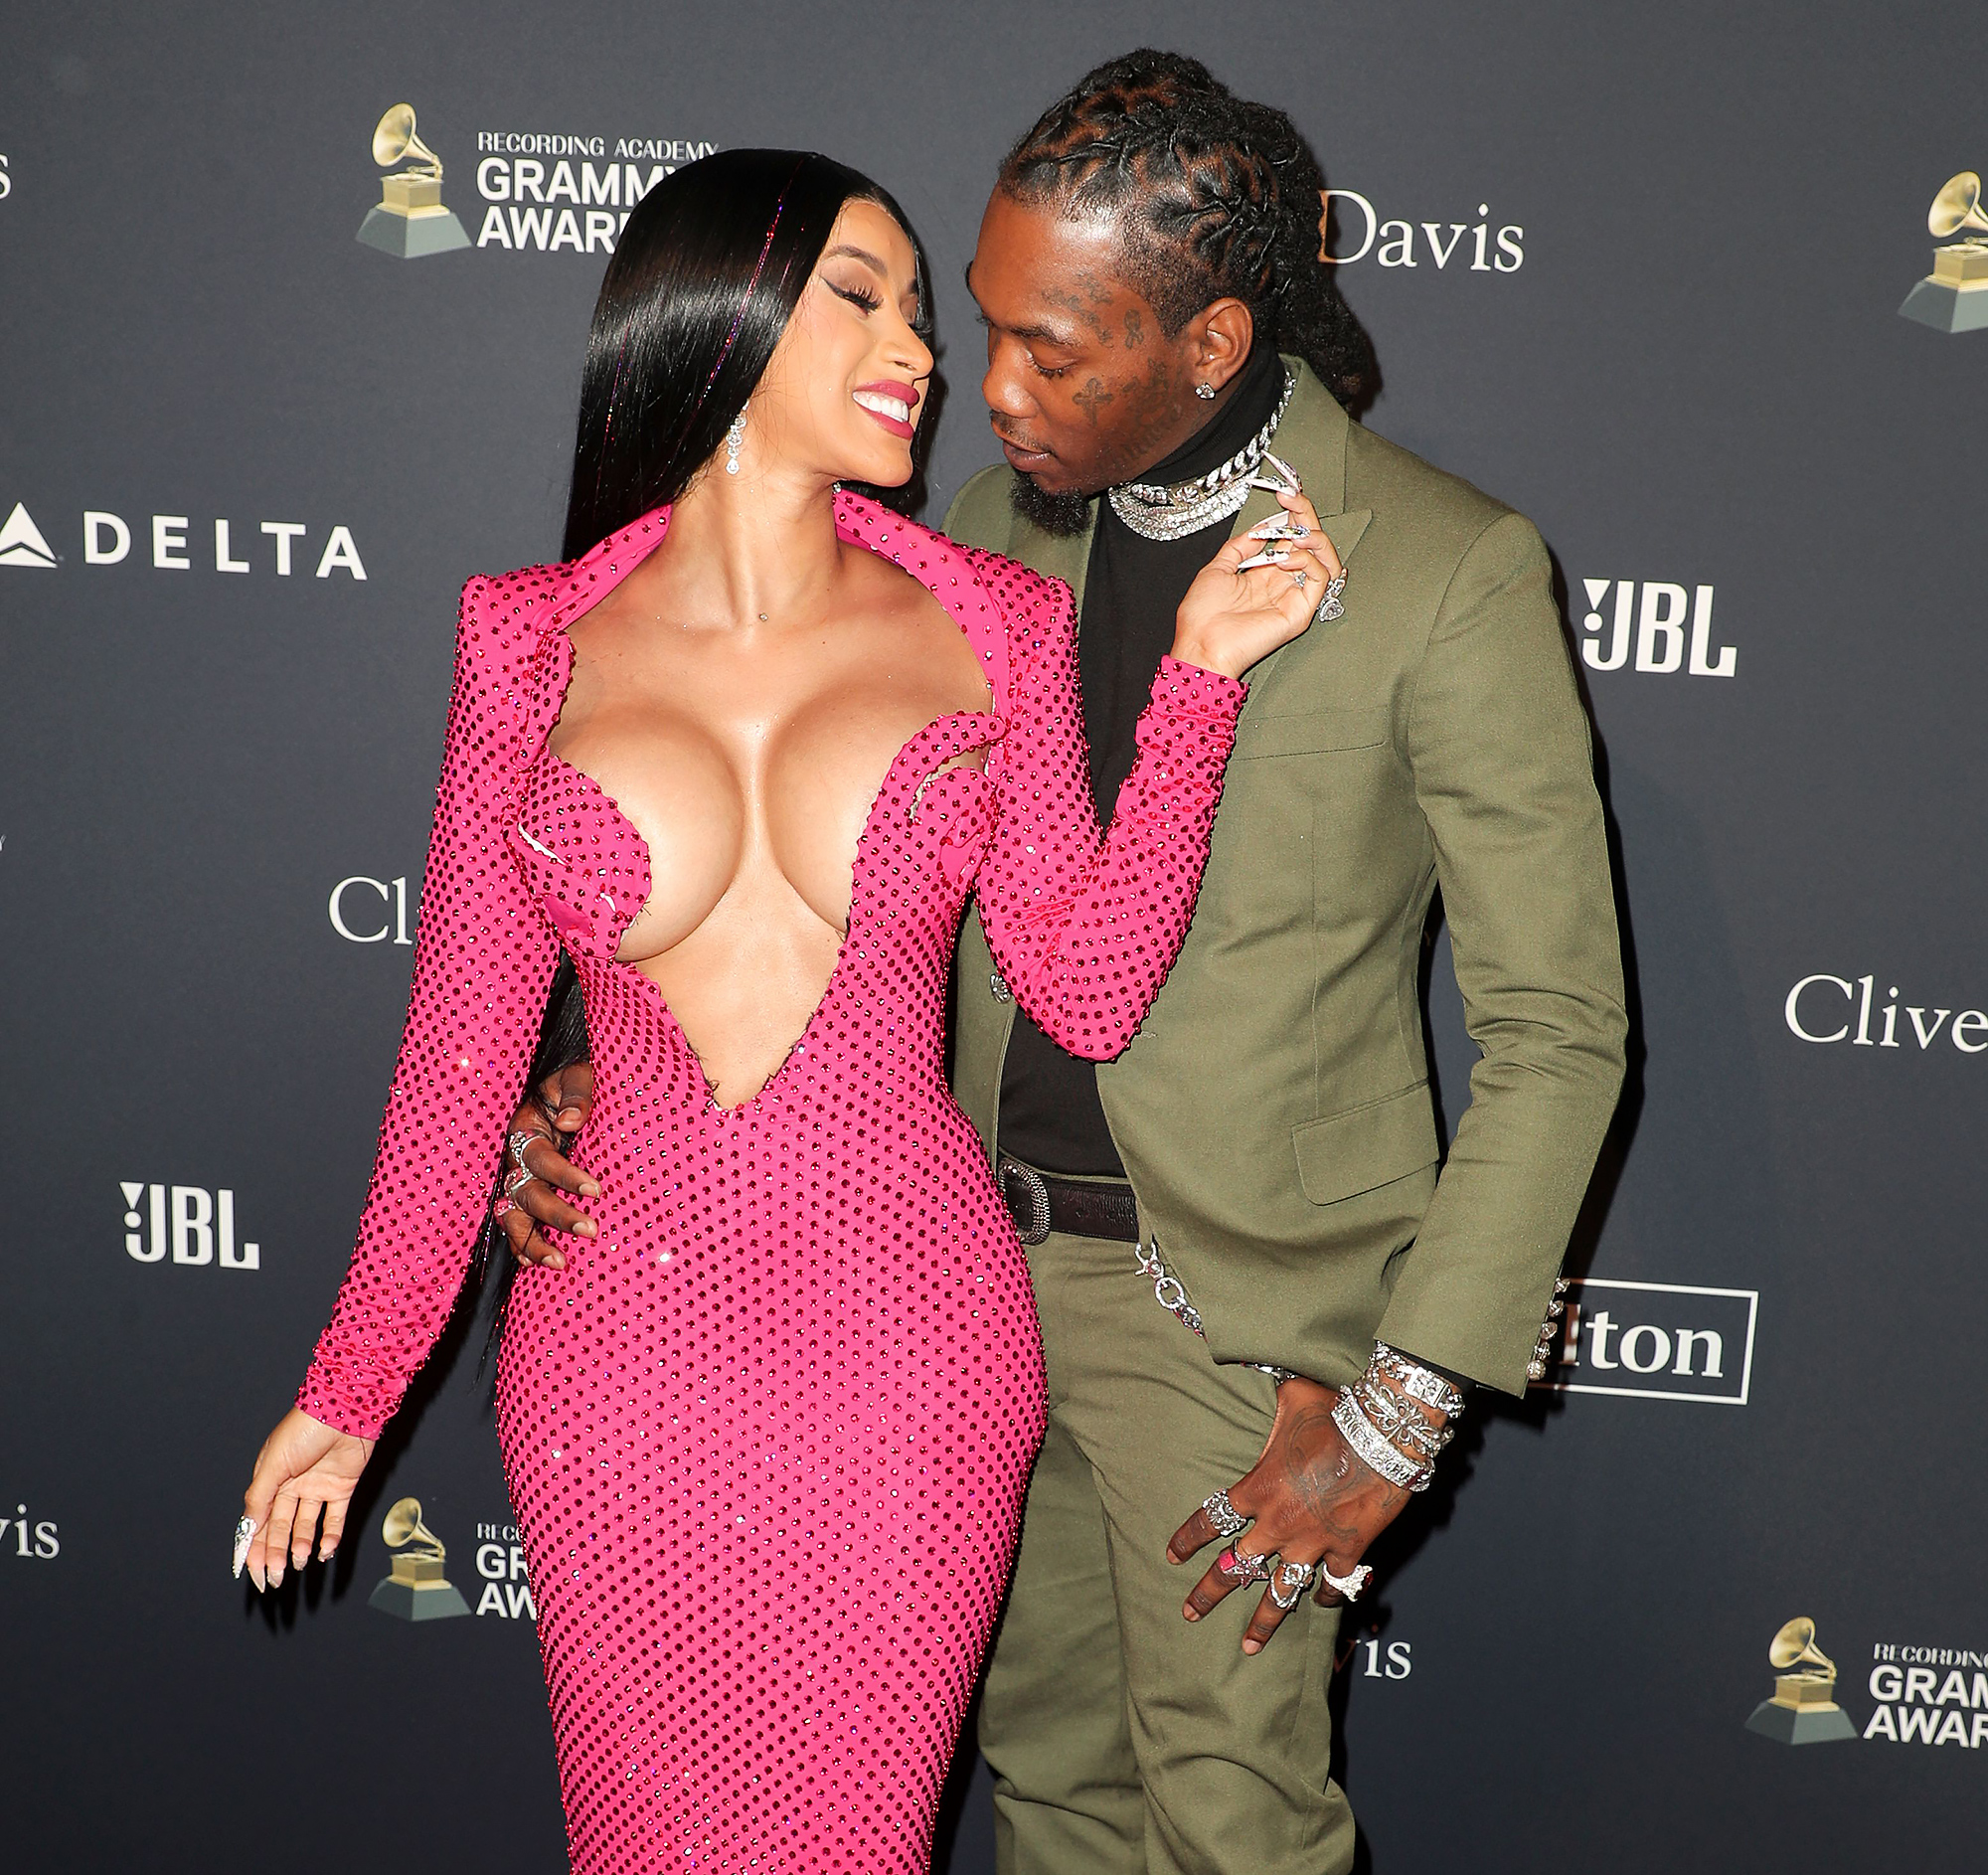 Cardi B and Offset Share Major PDA Moment on Grammys Red Carpet